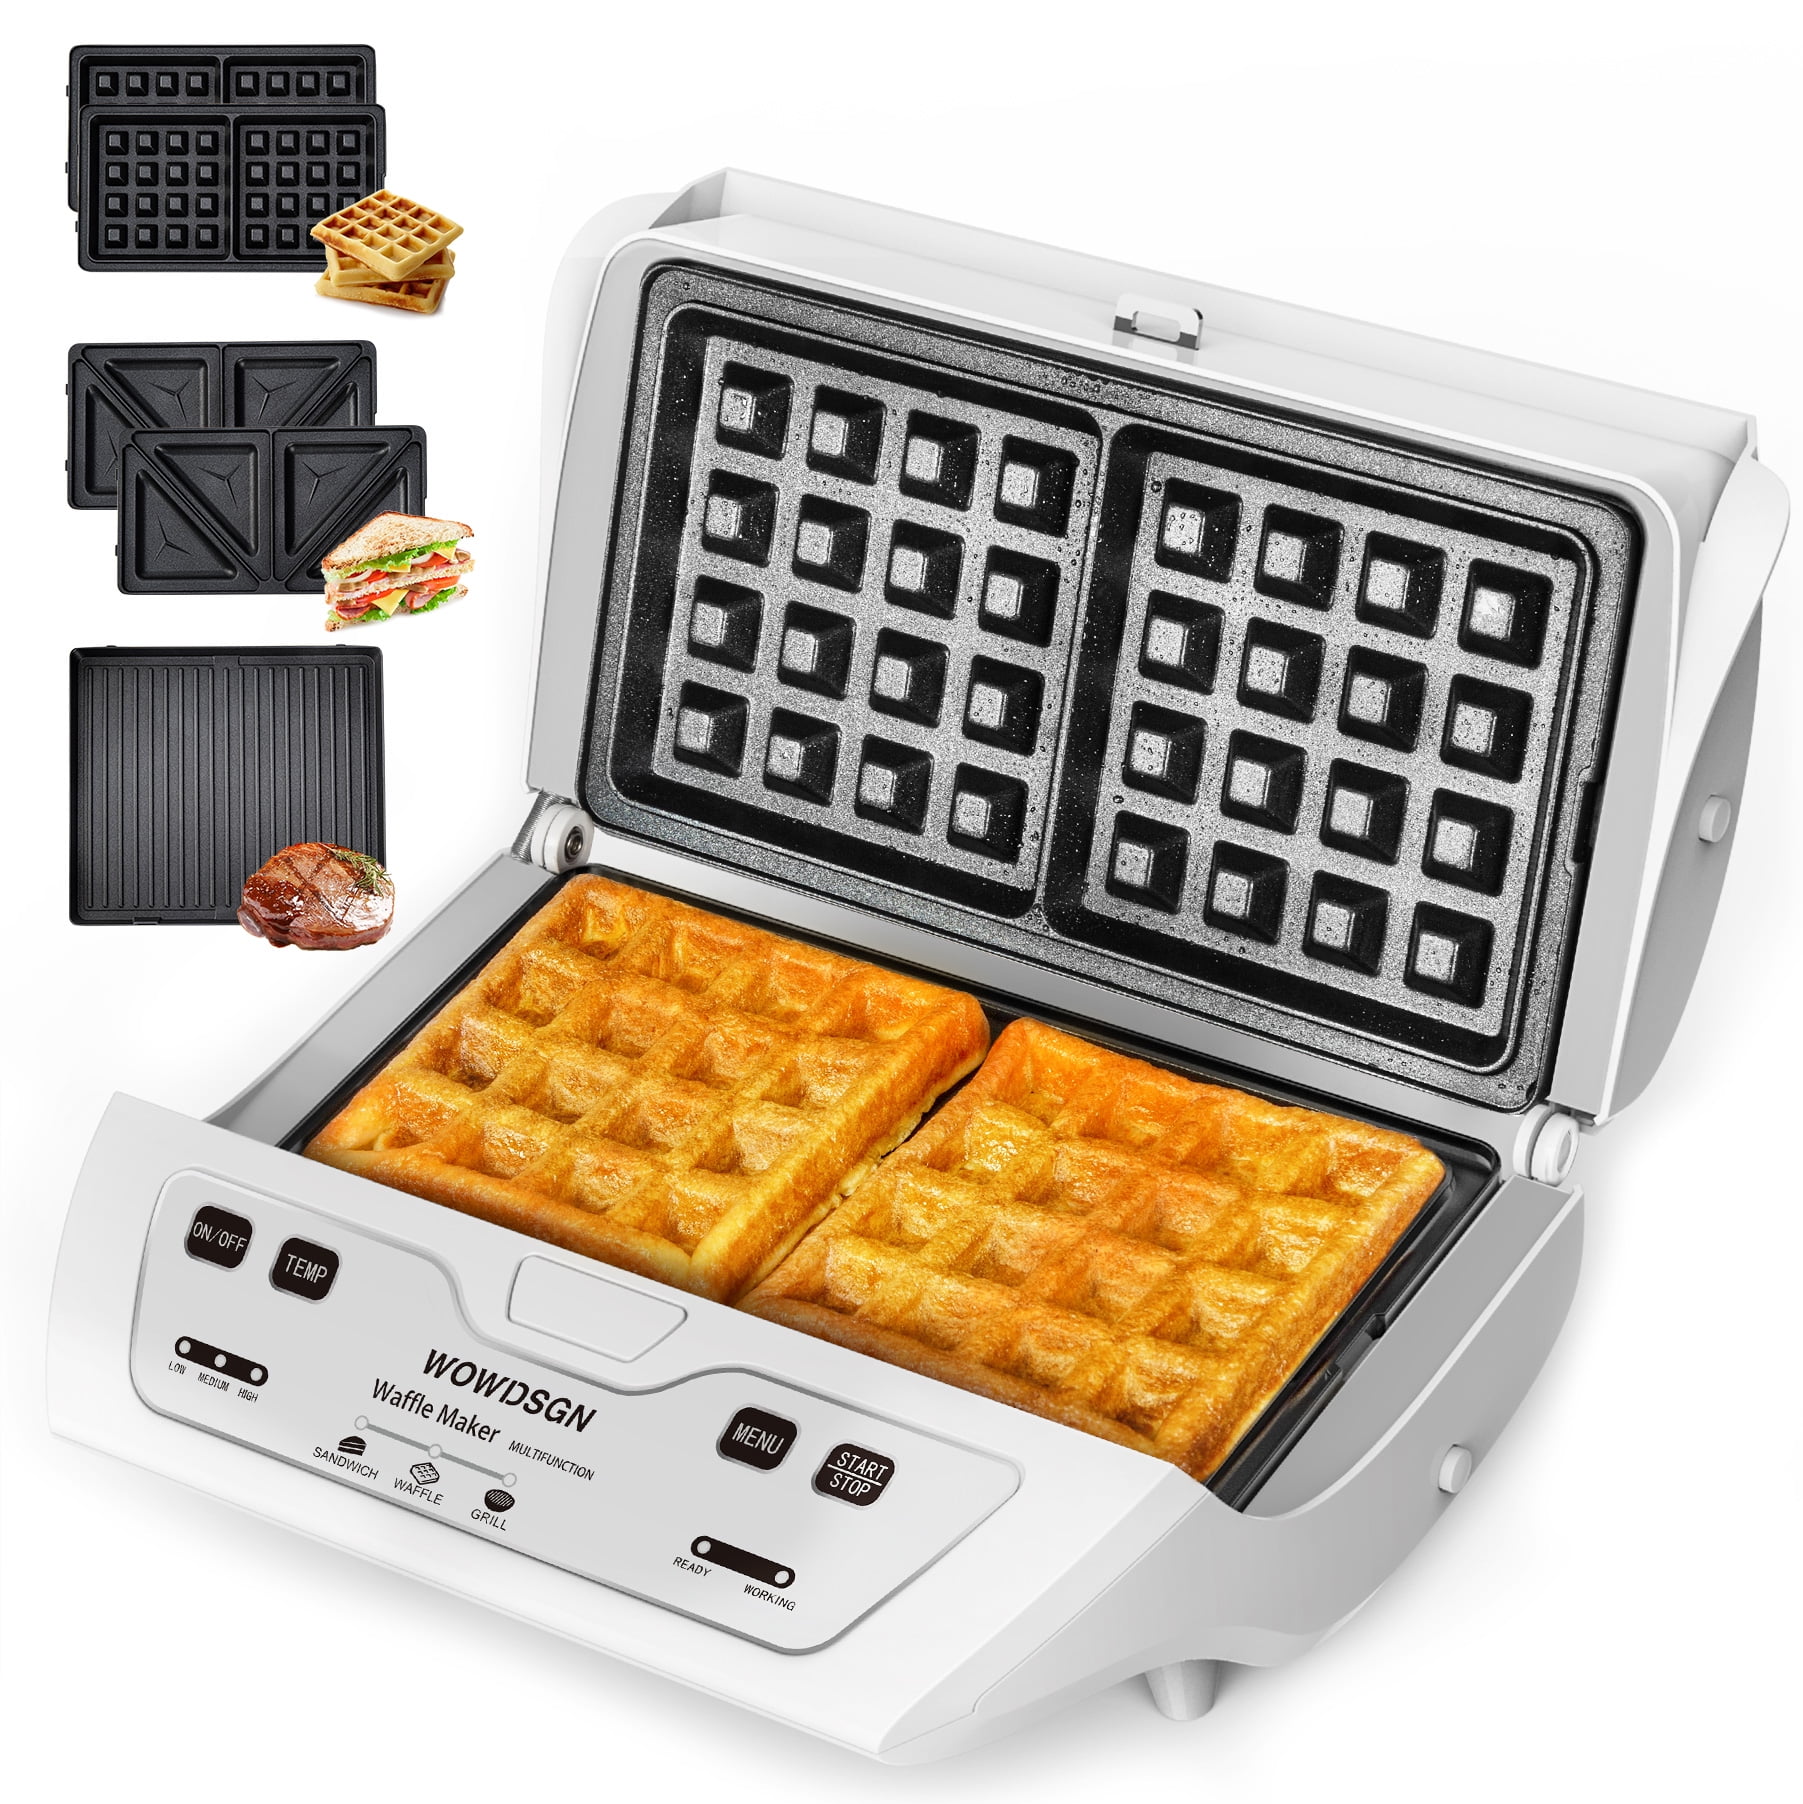 Waffle Maker 3 in 1 Deep Fill Sandwich Toasters & Panini Presses with Non-Stick Plates Easy to Clean Dishwasher-Safe Sandwich Machine Maker with 3 Interchangeable Plates Black